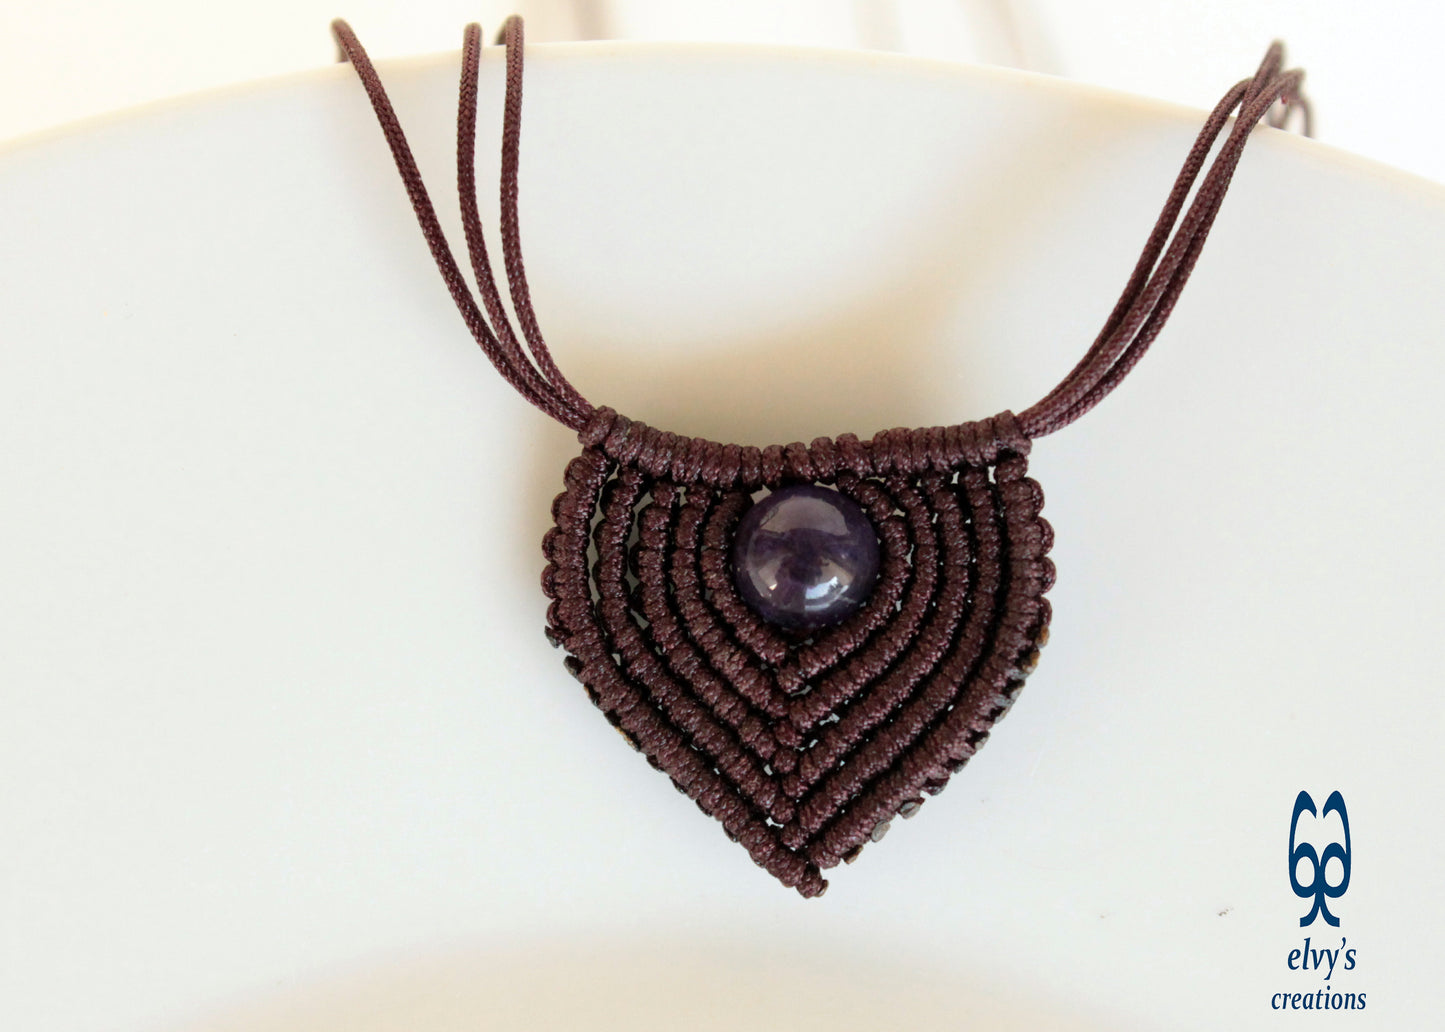 Unisex Brown Amethyst and Blue Apatite Macrame Beaded Necklace